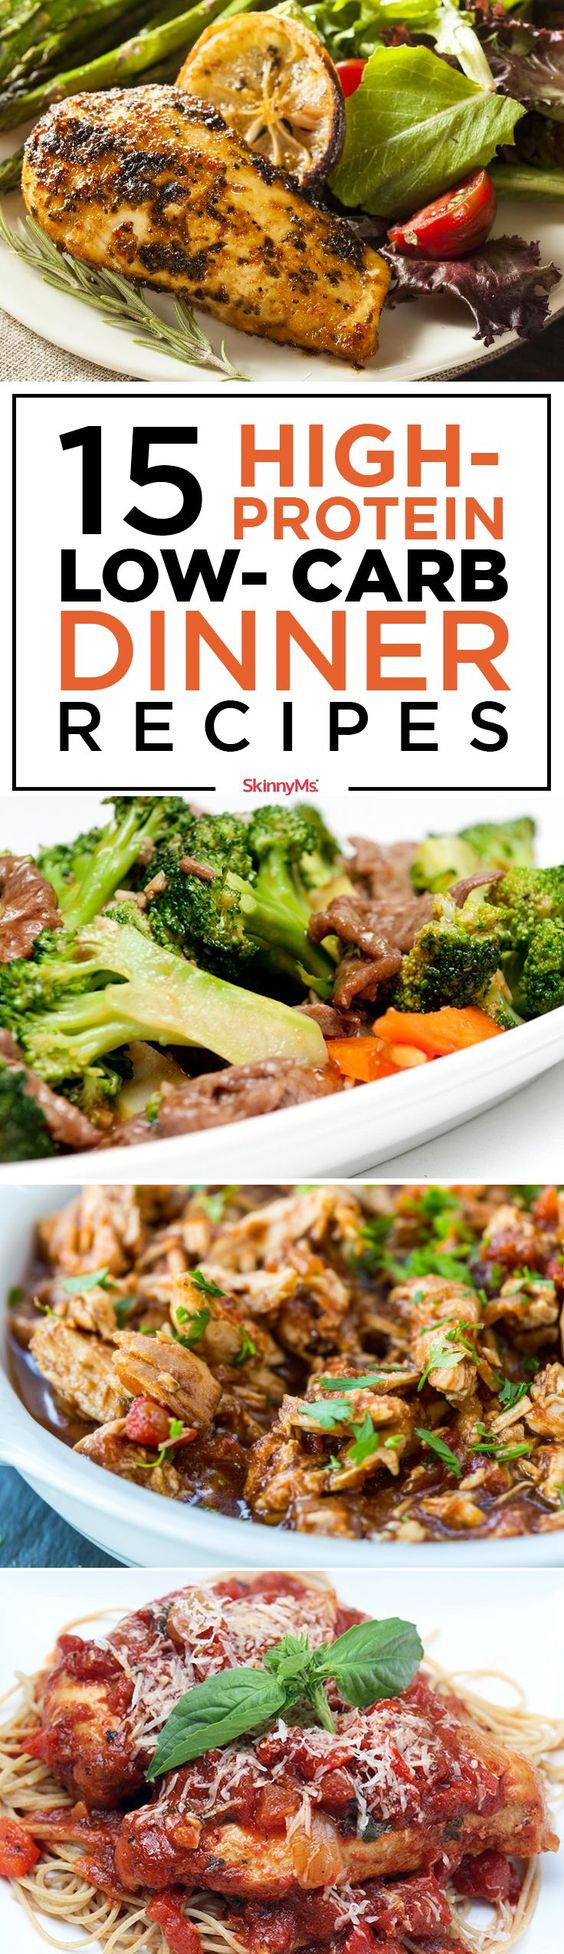 High Protein Low Carb Dinner Recipes
 Low carb dinner recipes High protein low carb and Dinner